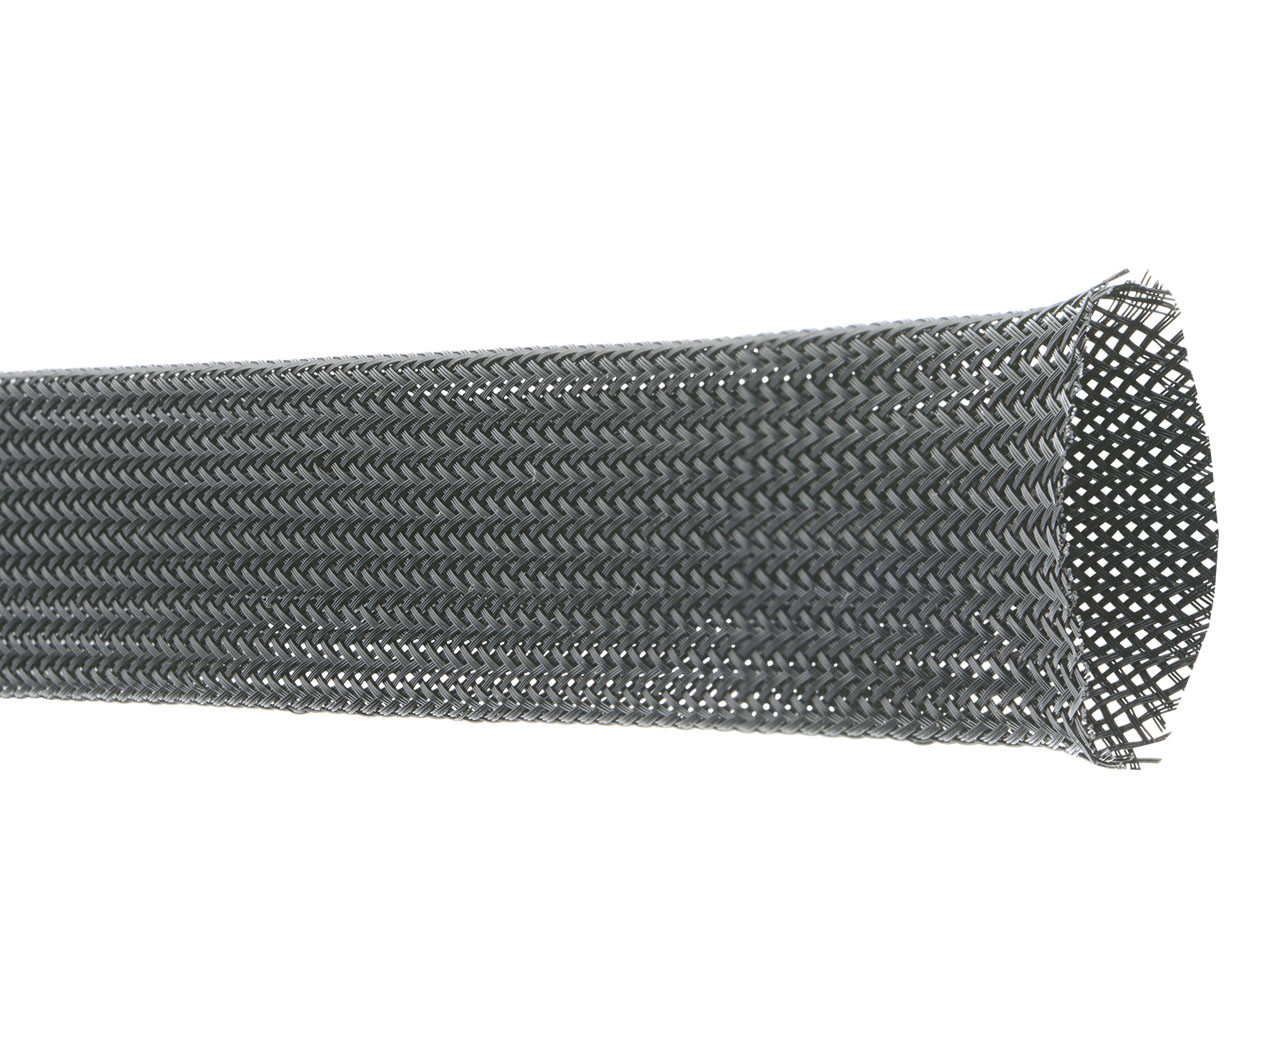 Expandable Sleeving 0.750 Inch